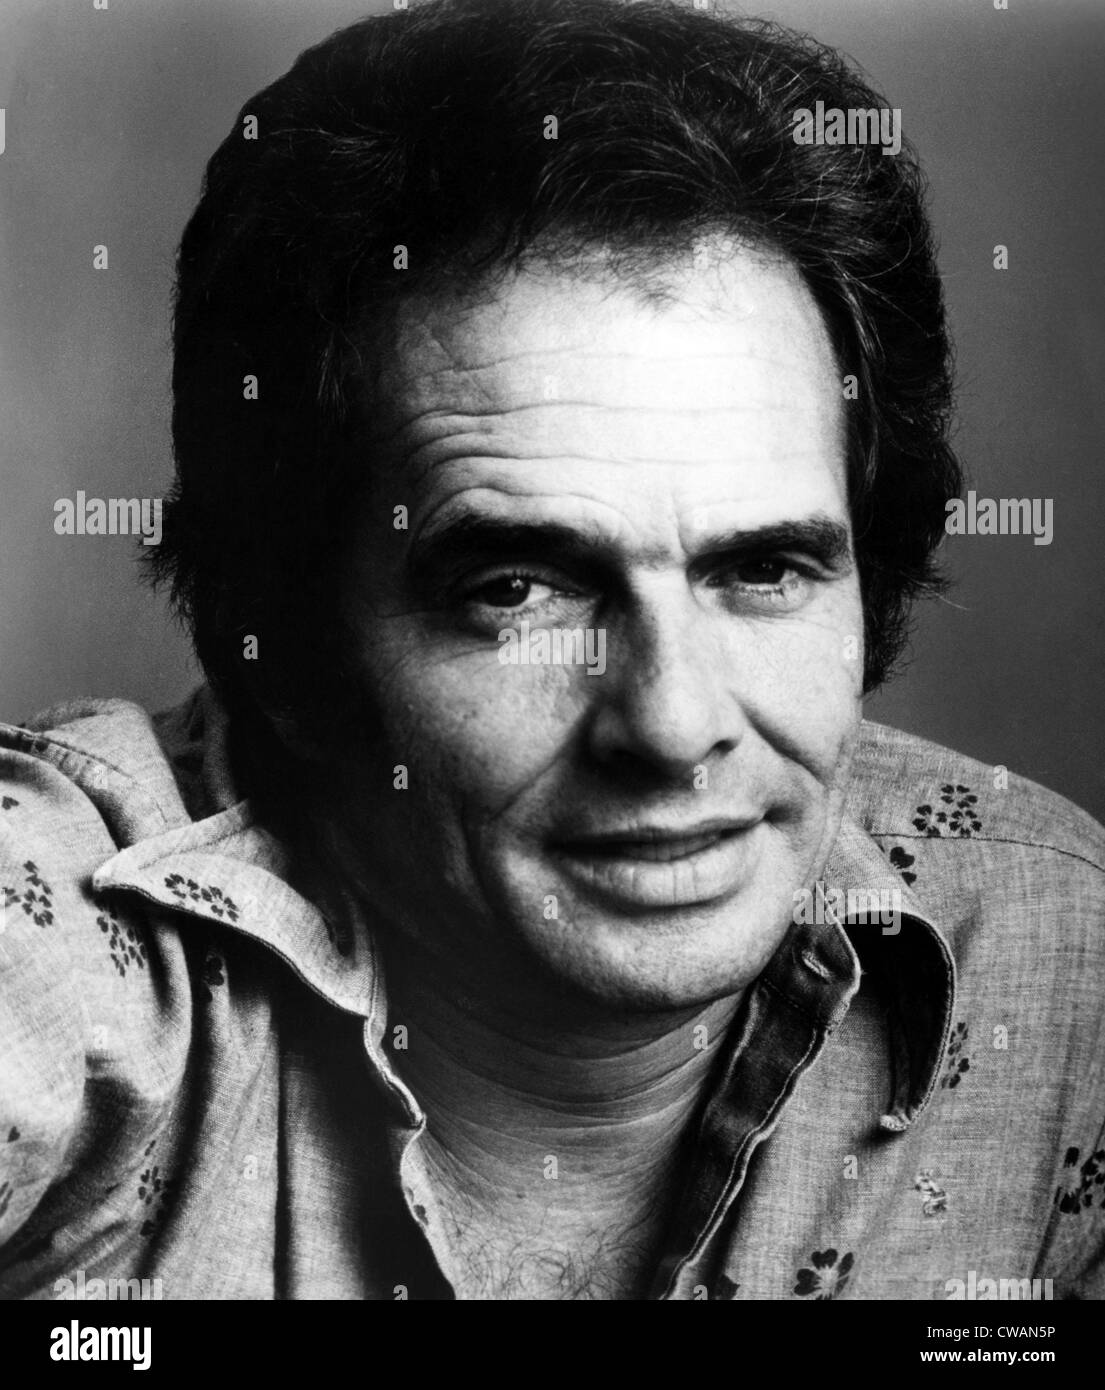 Country singer Merle Haggard. ca 1979. Courtesy: CSU Archives/Everett Collection Stock Photo